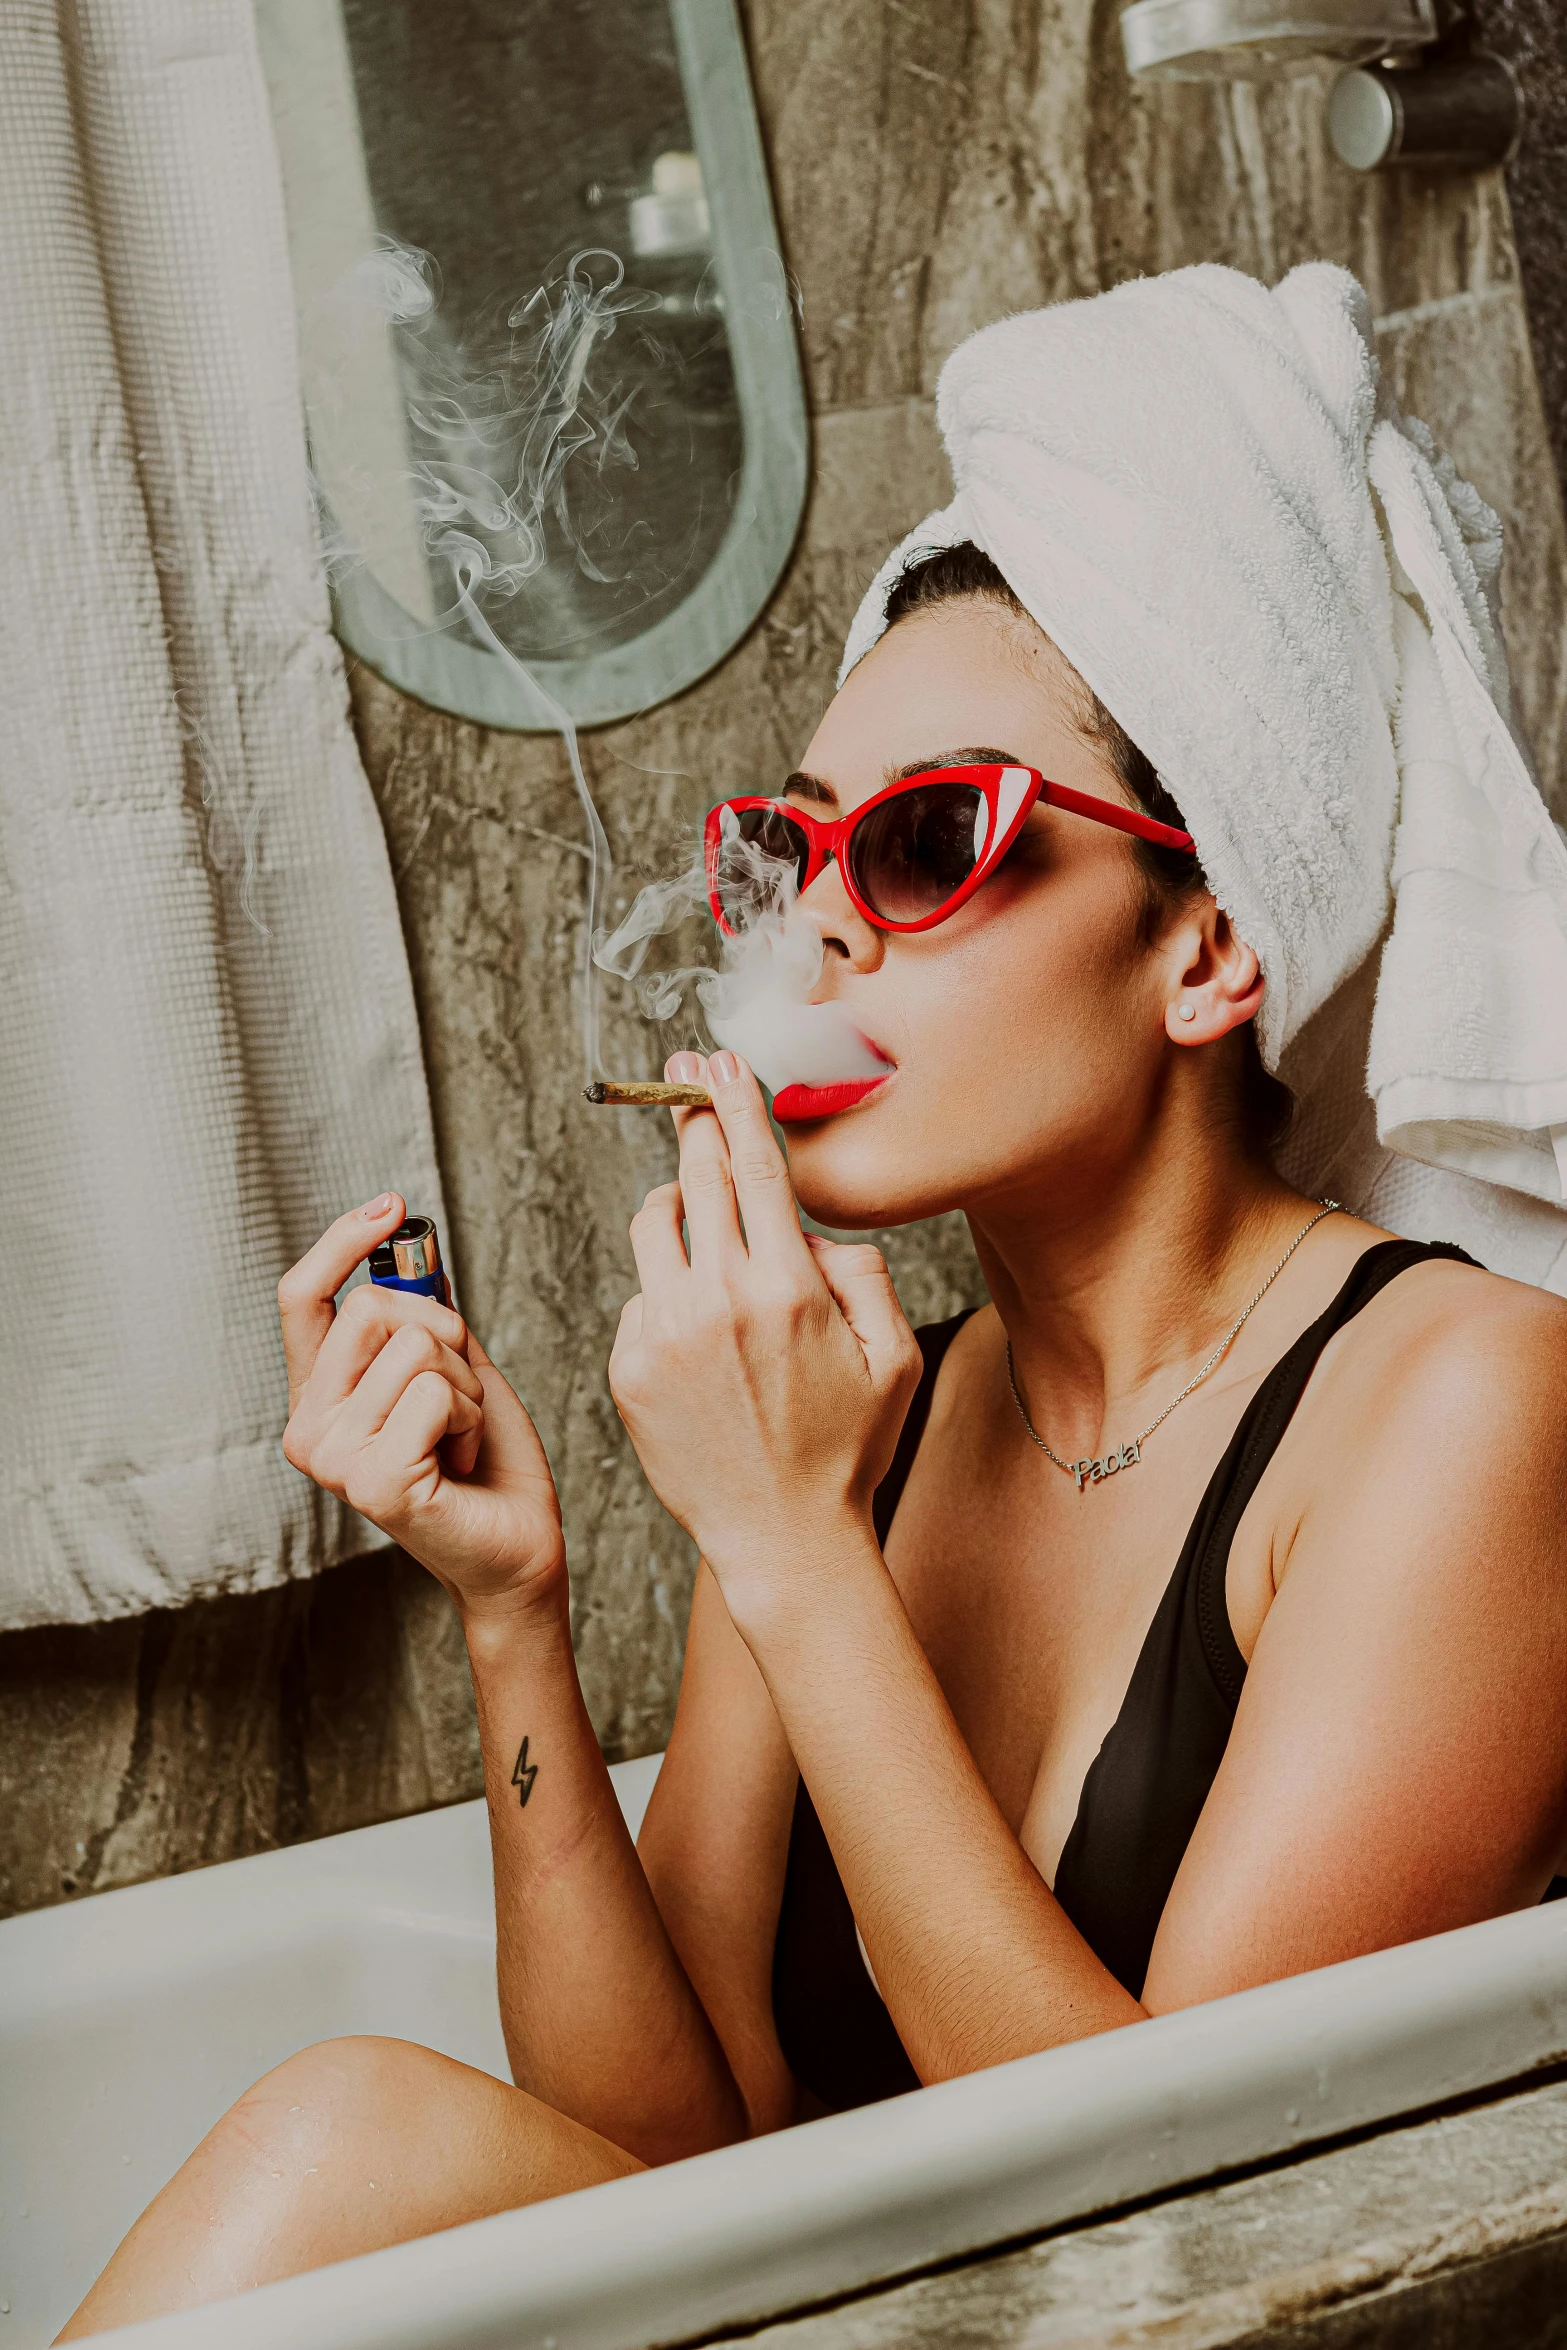 a woman wearing sunglasses while sitting in a bath tub smoking